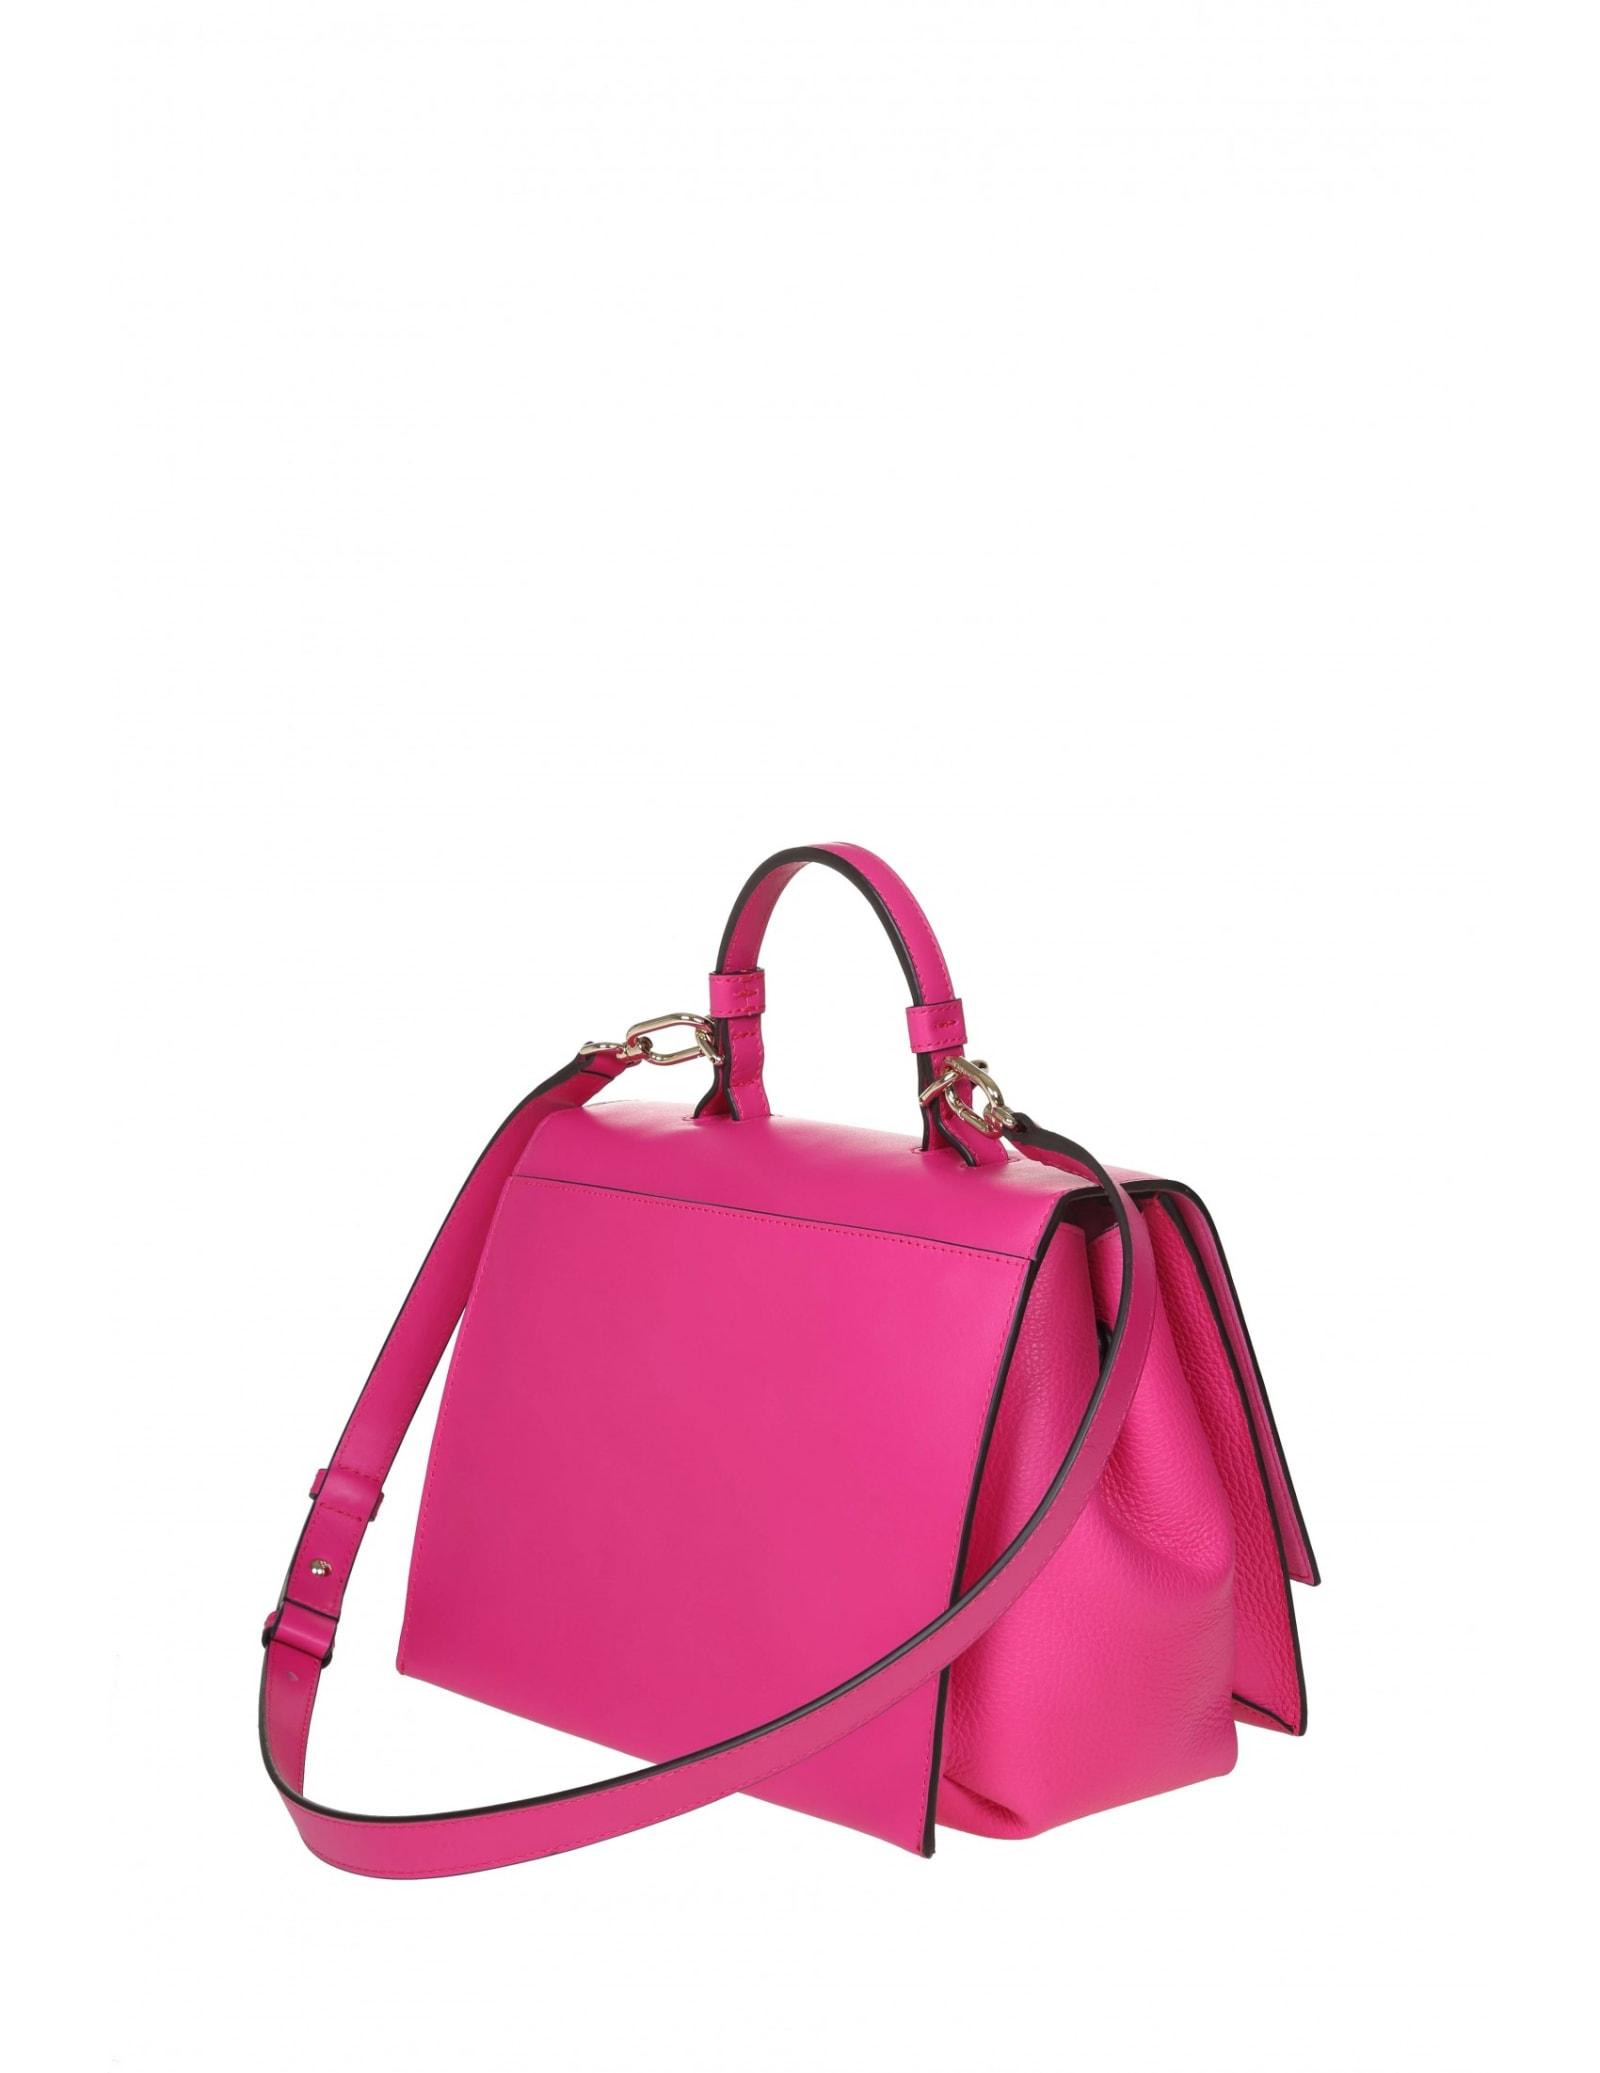 Furla Emma S Bag In Fuchsia Color Leather in Pink | Lyst